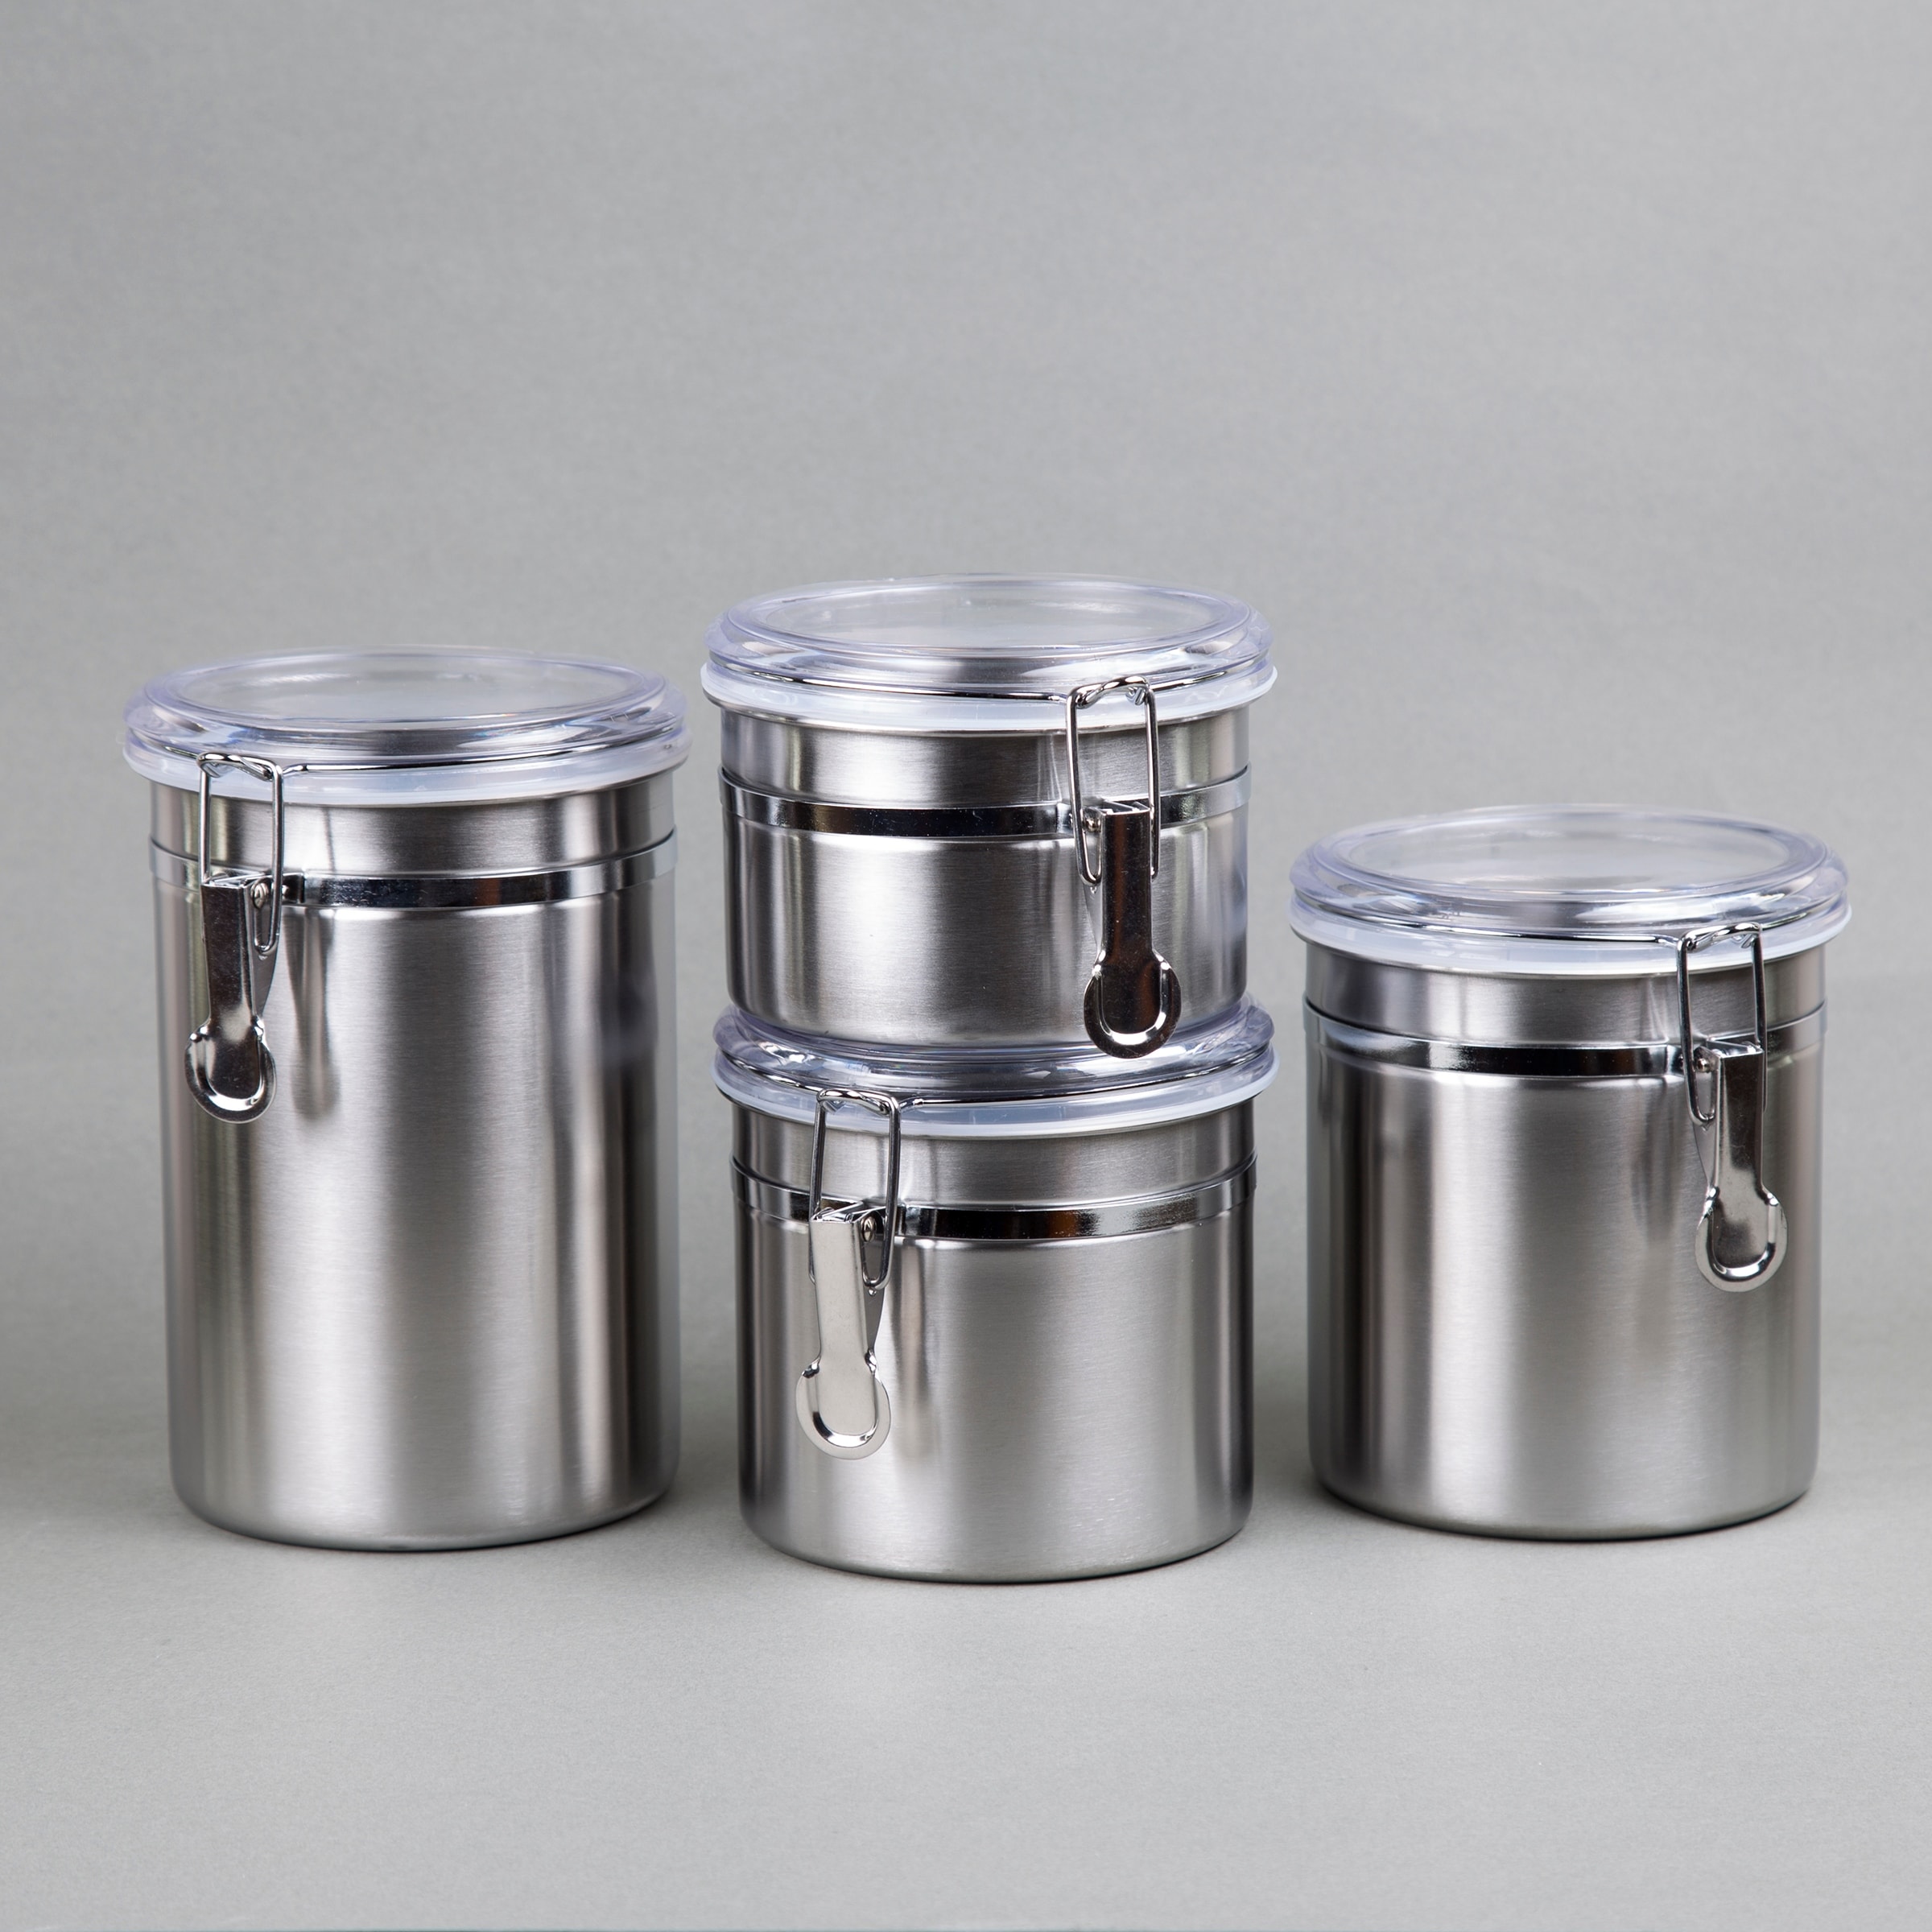 https://ak1.ostkcdn.com/images/products/is/images/direct/6345a71ff79ad70991ff7ac5cf9b45b06722c9d5/Creative-Home-4-Piece-Canister-Container-Set-with-Air-Tight-Lid-and-Locking-Clamp%2C-Stainless-Steel.jpg